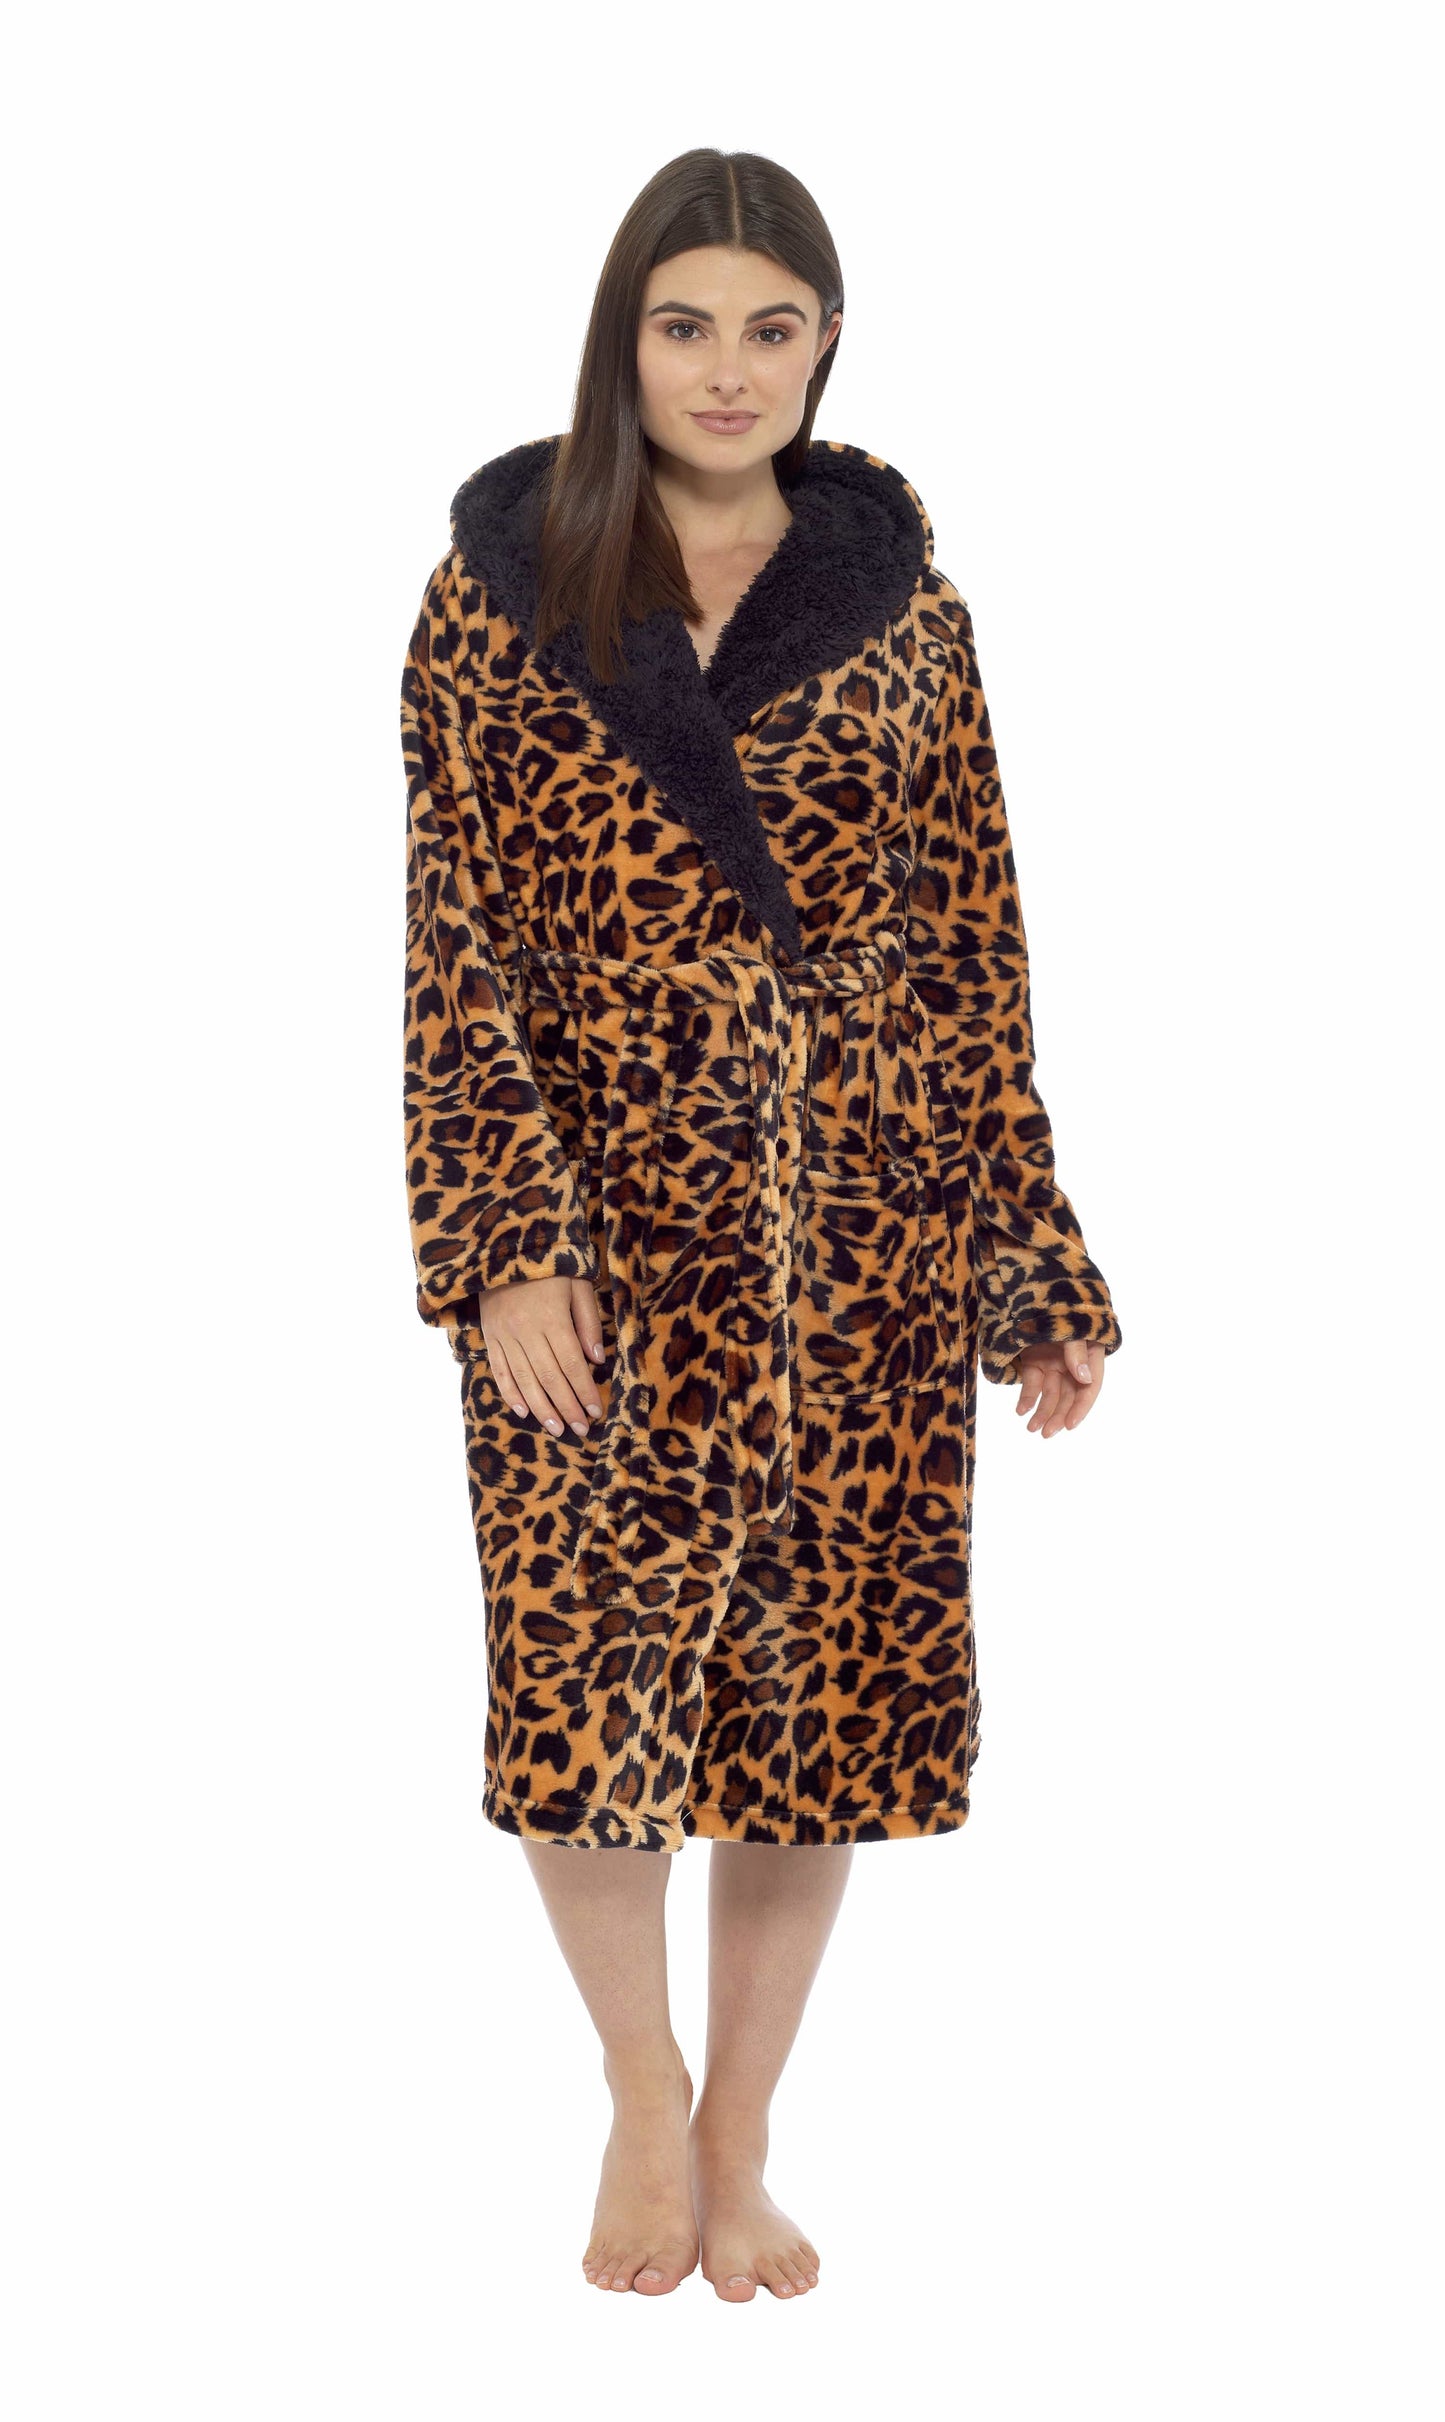 Leopard Plush Fleece Hooded Robe Dressing Gown With Reversible Sherpa Lining Daisy Dreamer Dressing Gown